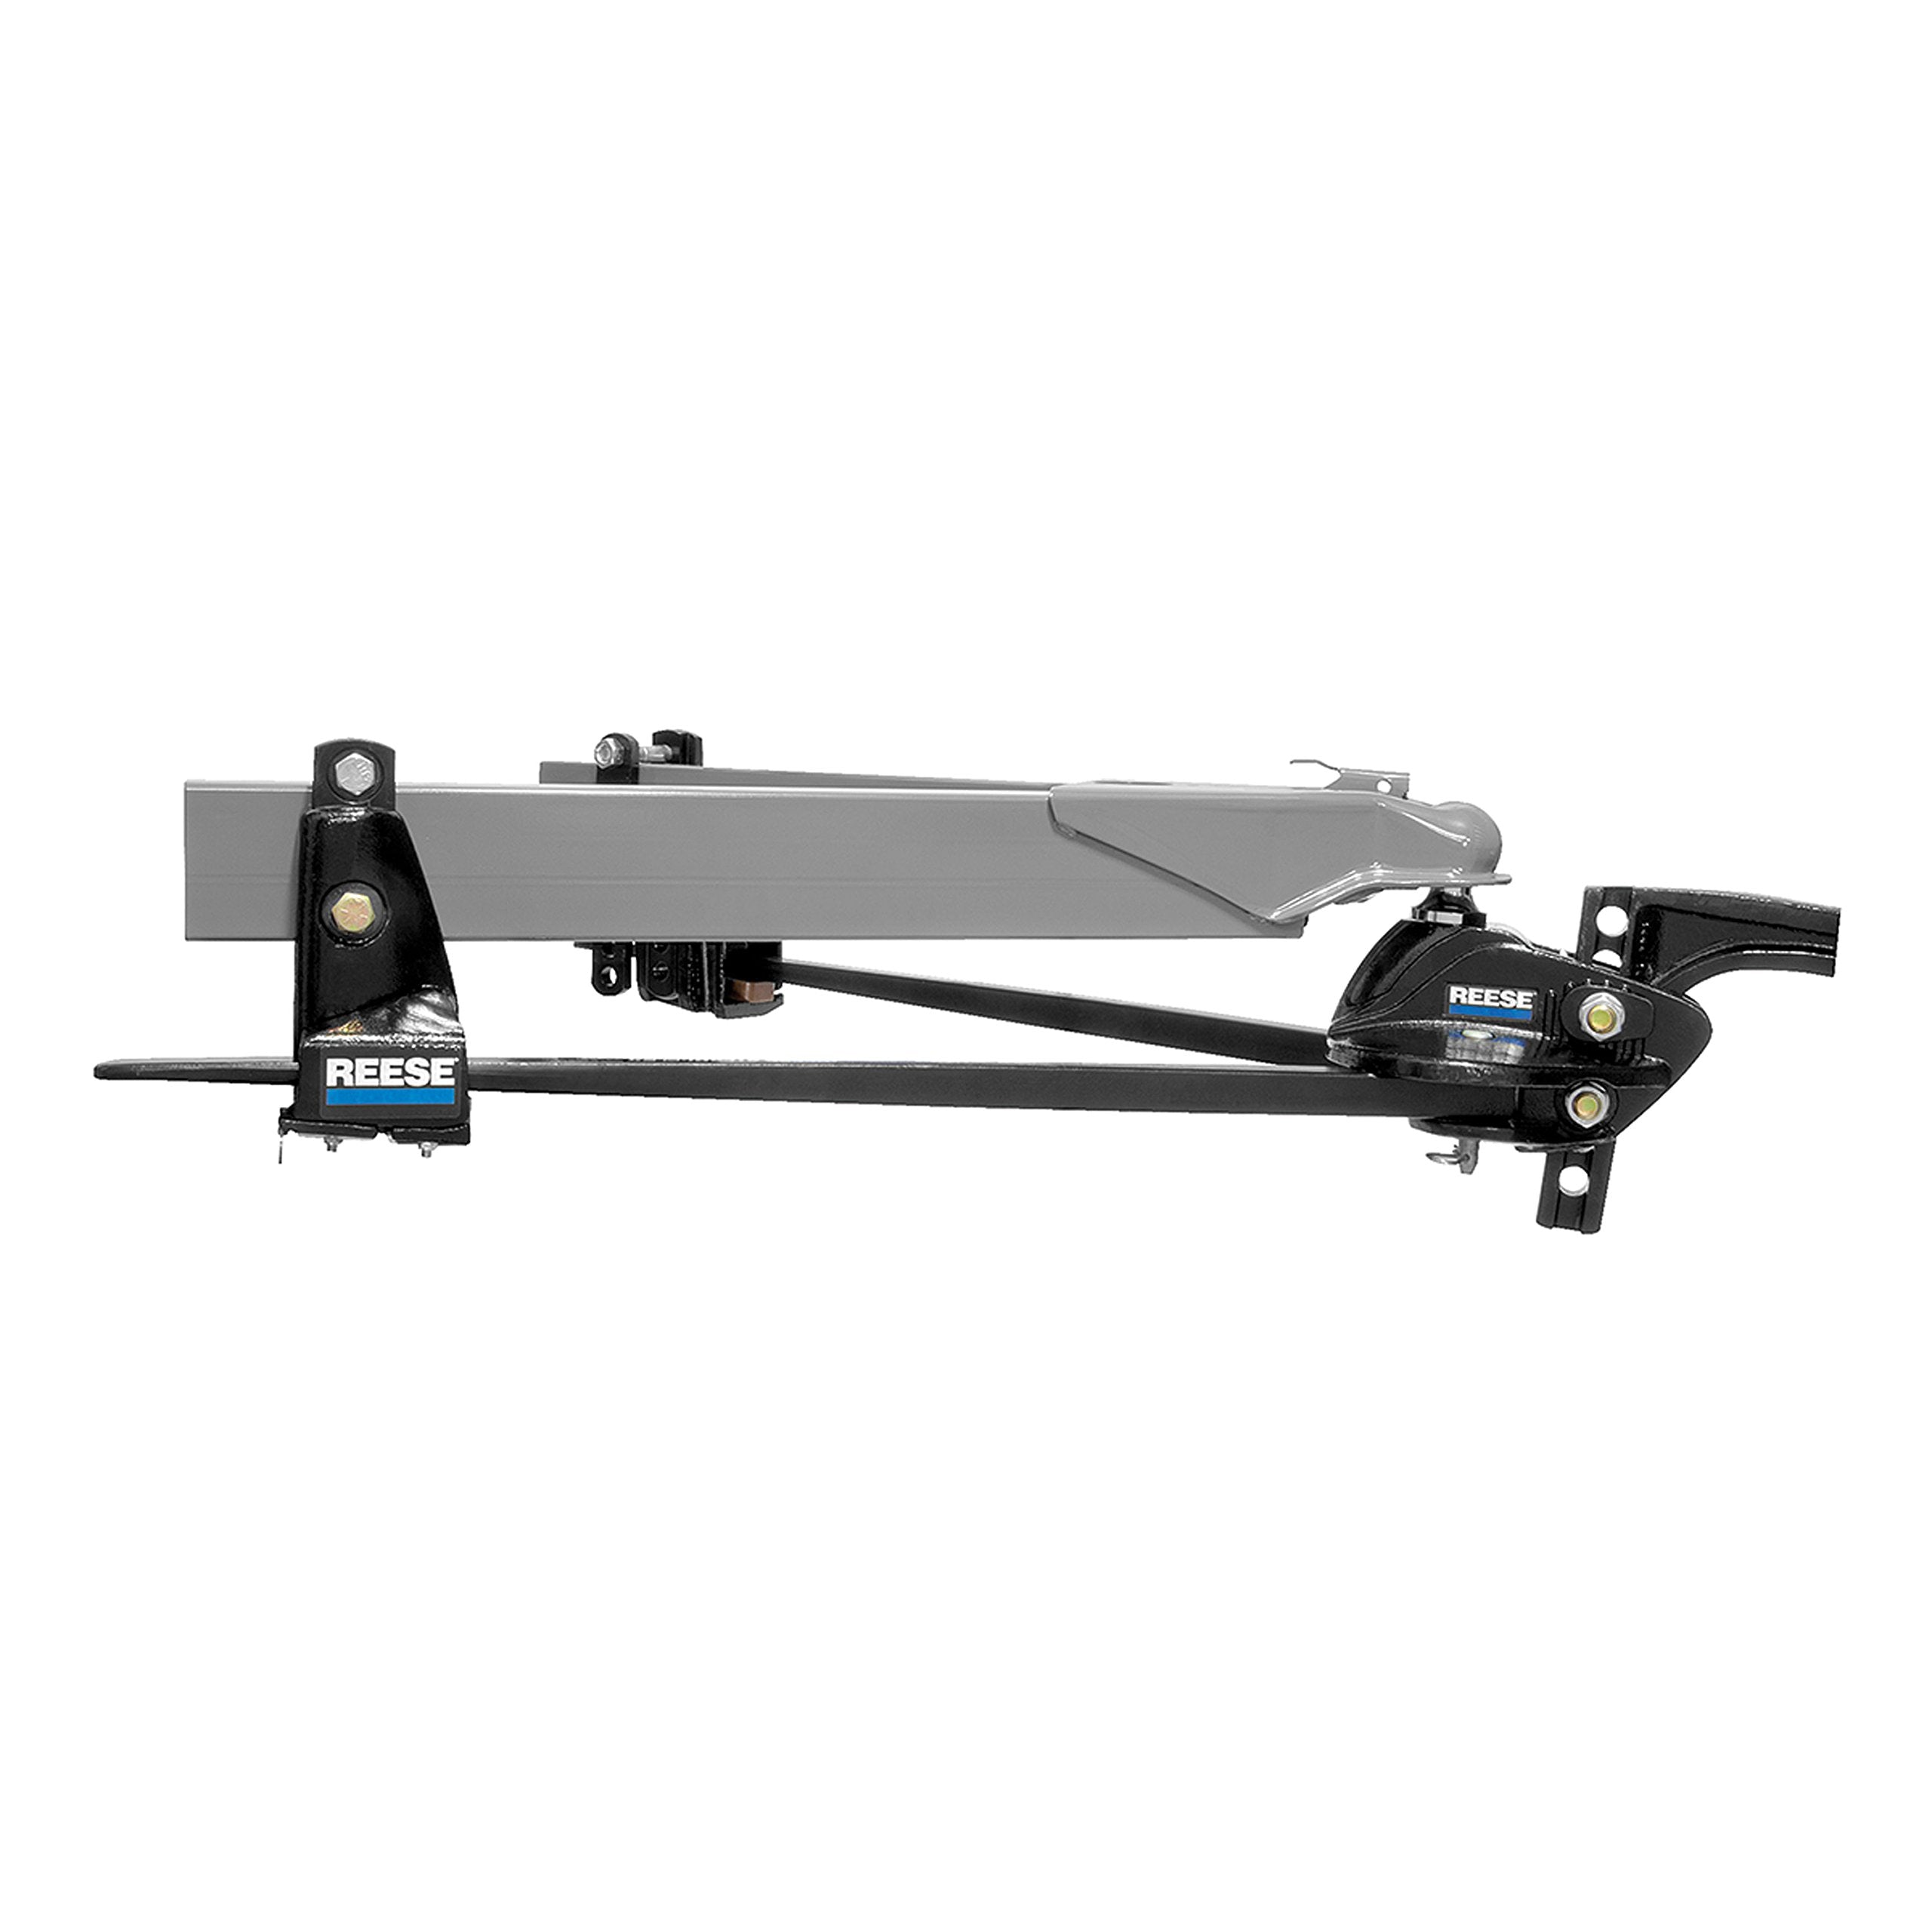 Reese 66561 Steadi-Flex Trunnion Weight-Distributing Hitch Kit with Shank - 14,000 lb.